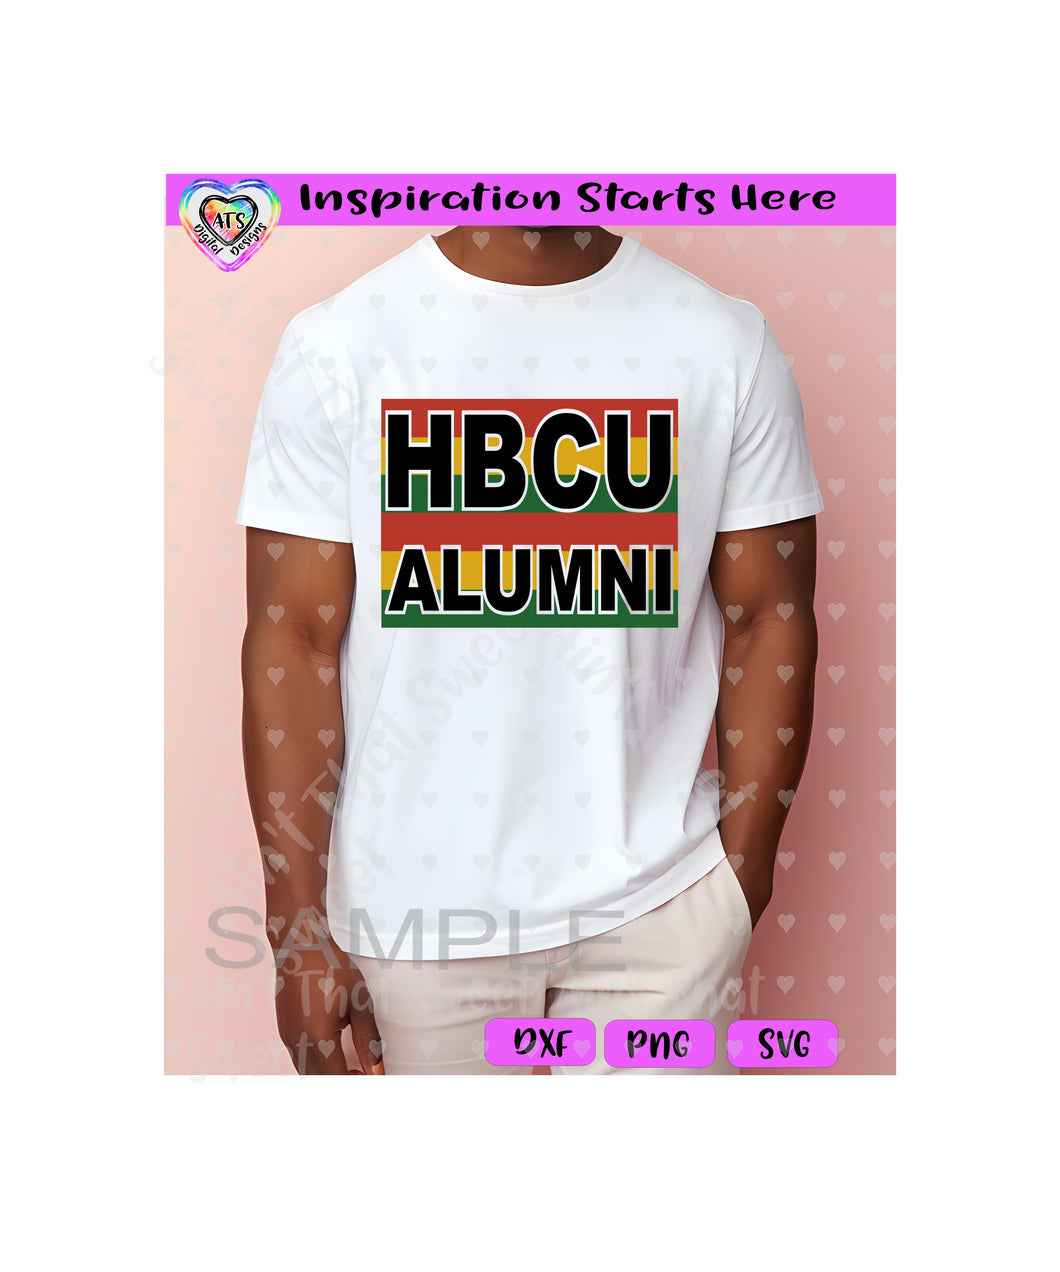 HBCU Alumni - Red Yellow Green Background  - Transparent PNG, SVG, DXF  - Silhouette, Cricut, Scan N Cut